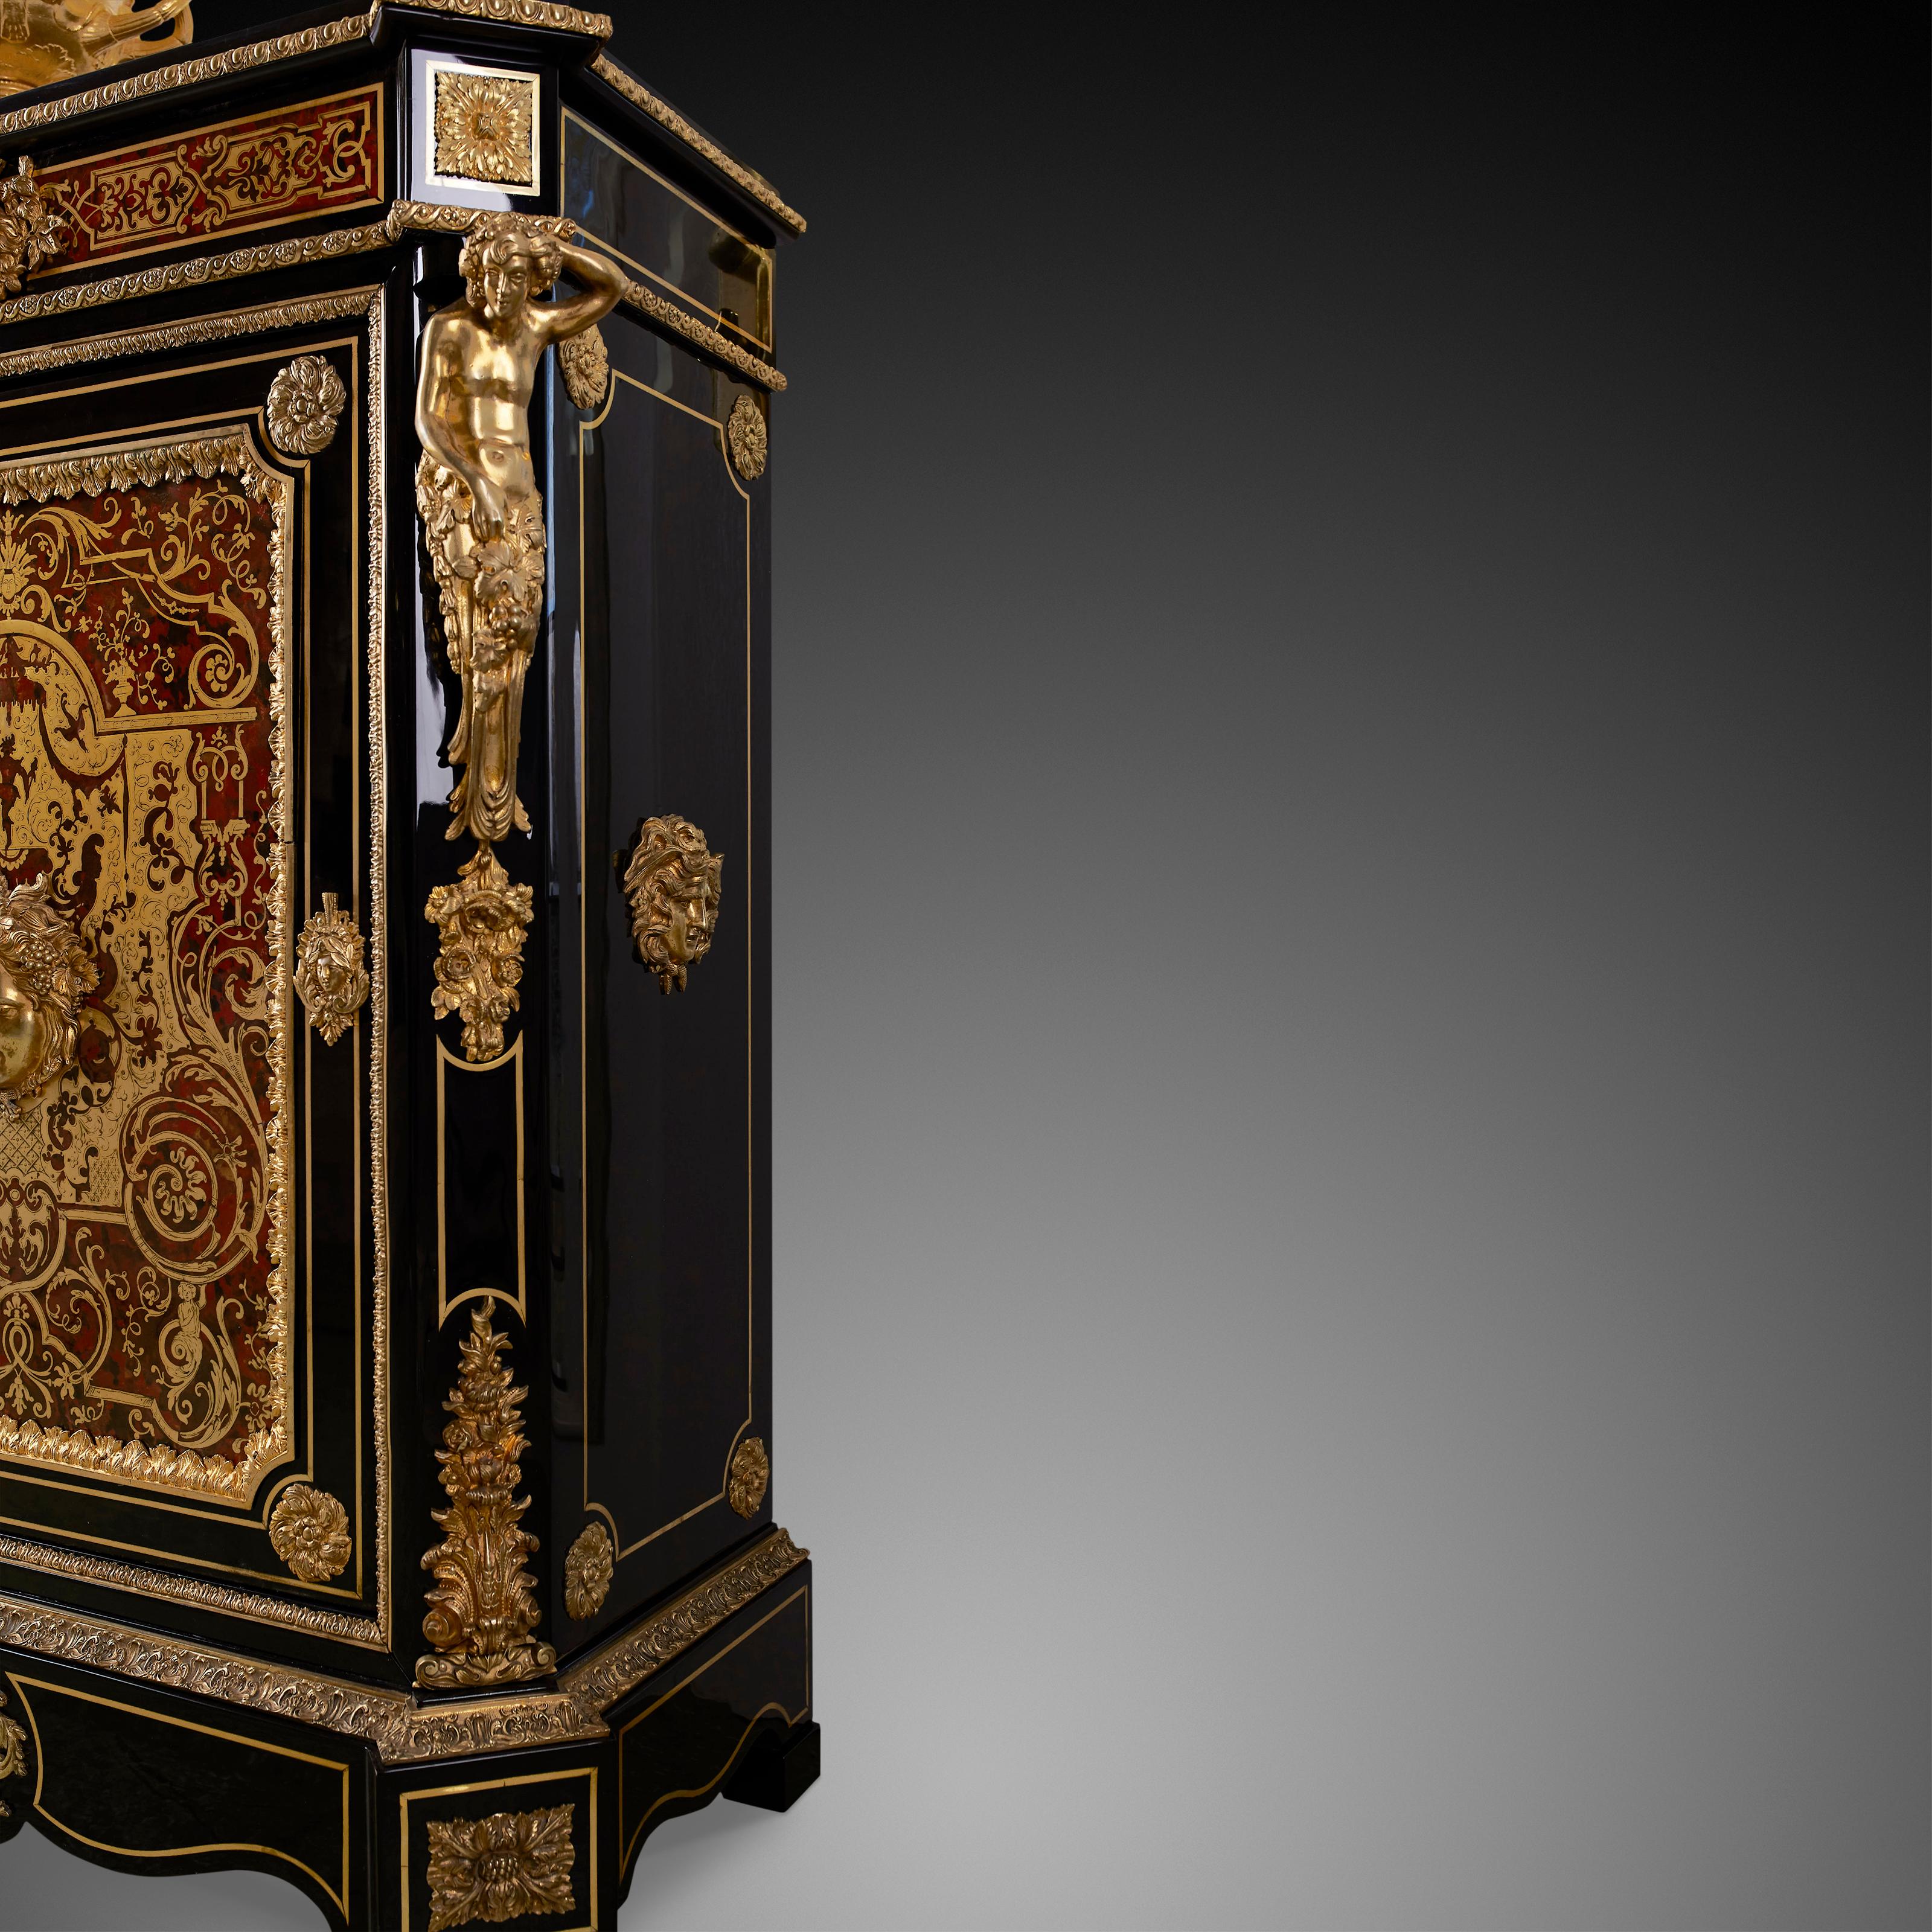 This wooden cabinet is designed in the Boulle style. This style was very popular around the time of Napoleon III. The characteristic of this style is the use of small pieces of wood in furniture, inlaid designs with many different materials: